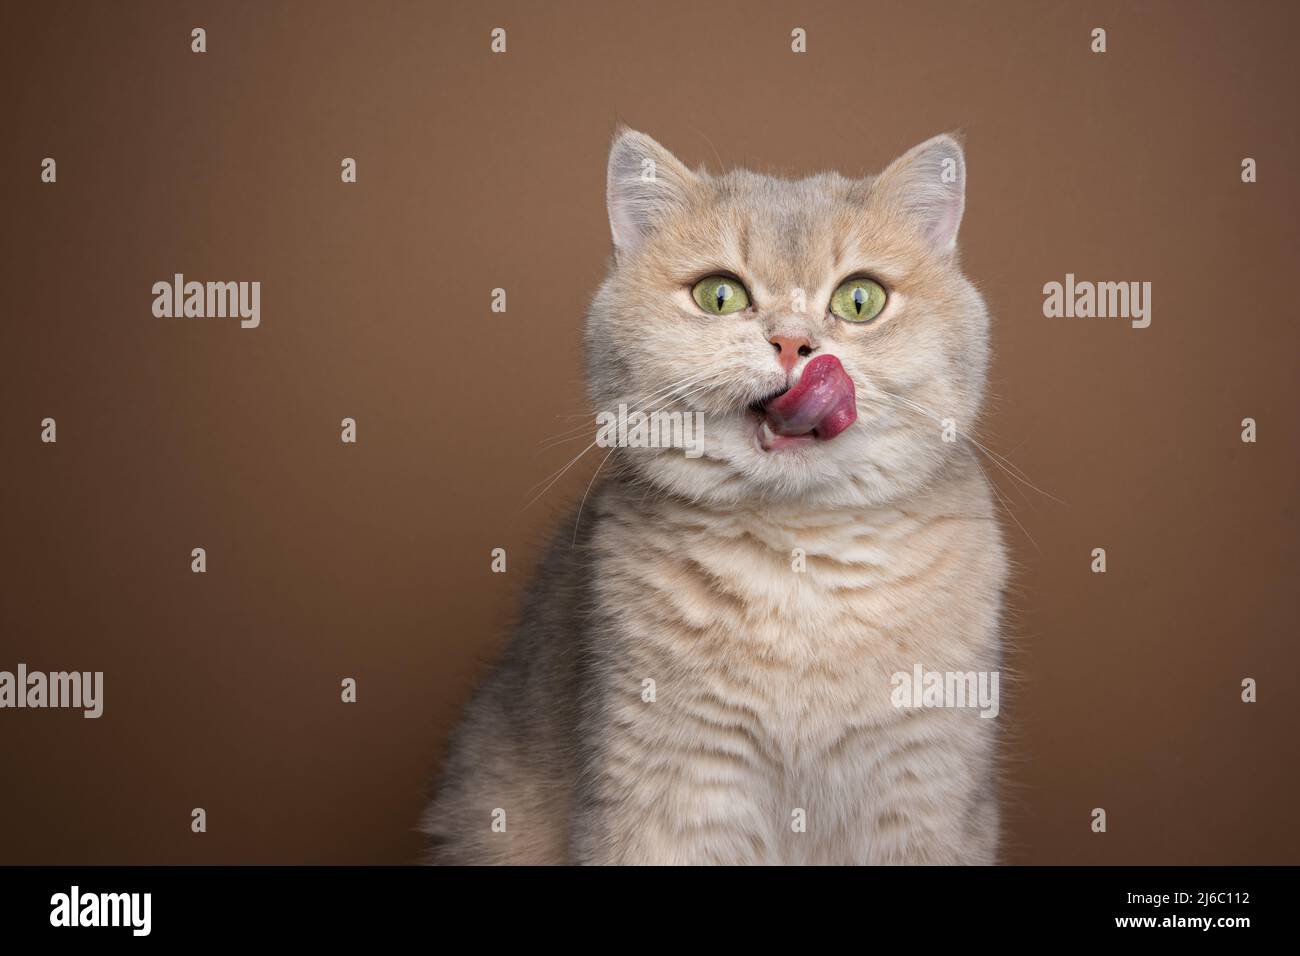 hungry british shorthair cat licking lips portrait with copy space Stock Photo